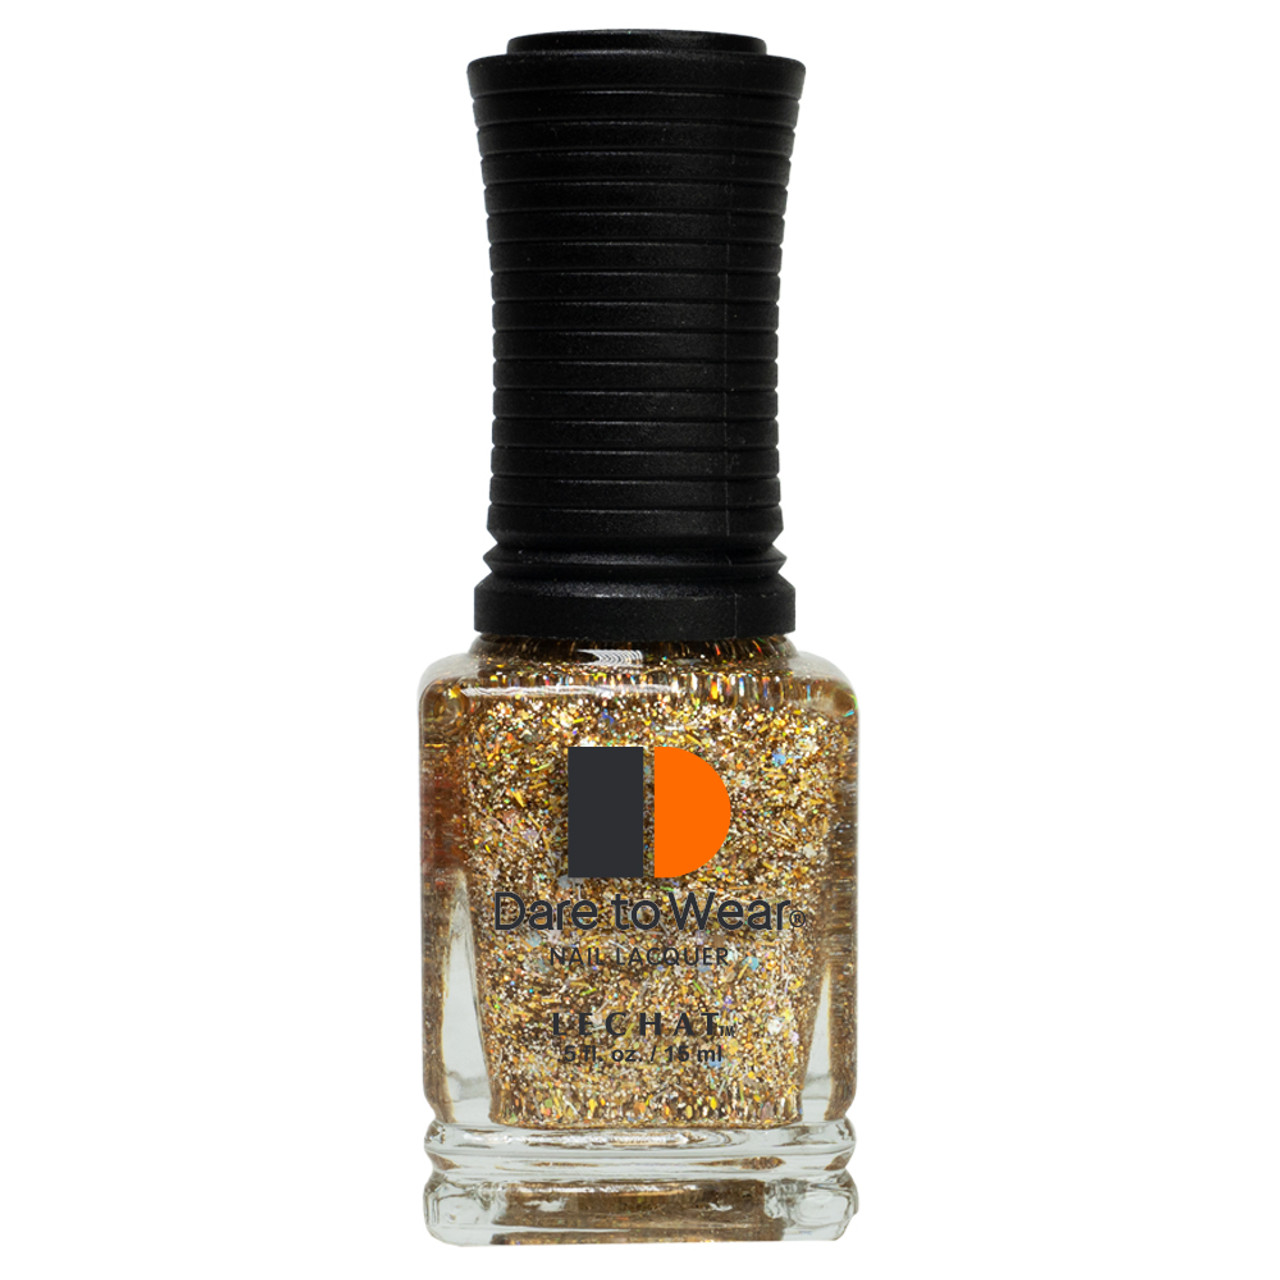 LeChat Dare to Wear Sky Dust Glitter Nail Lacquer Twilight Twinkle - .5 oz